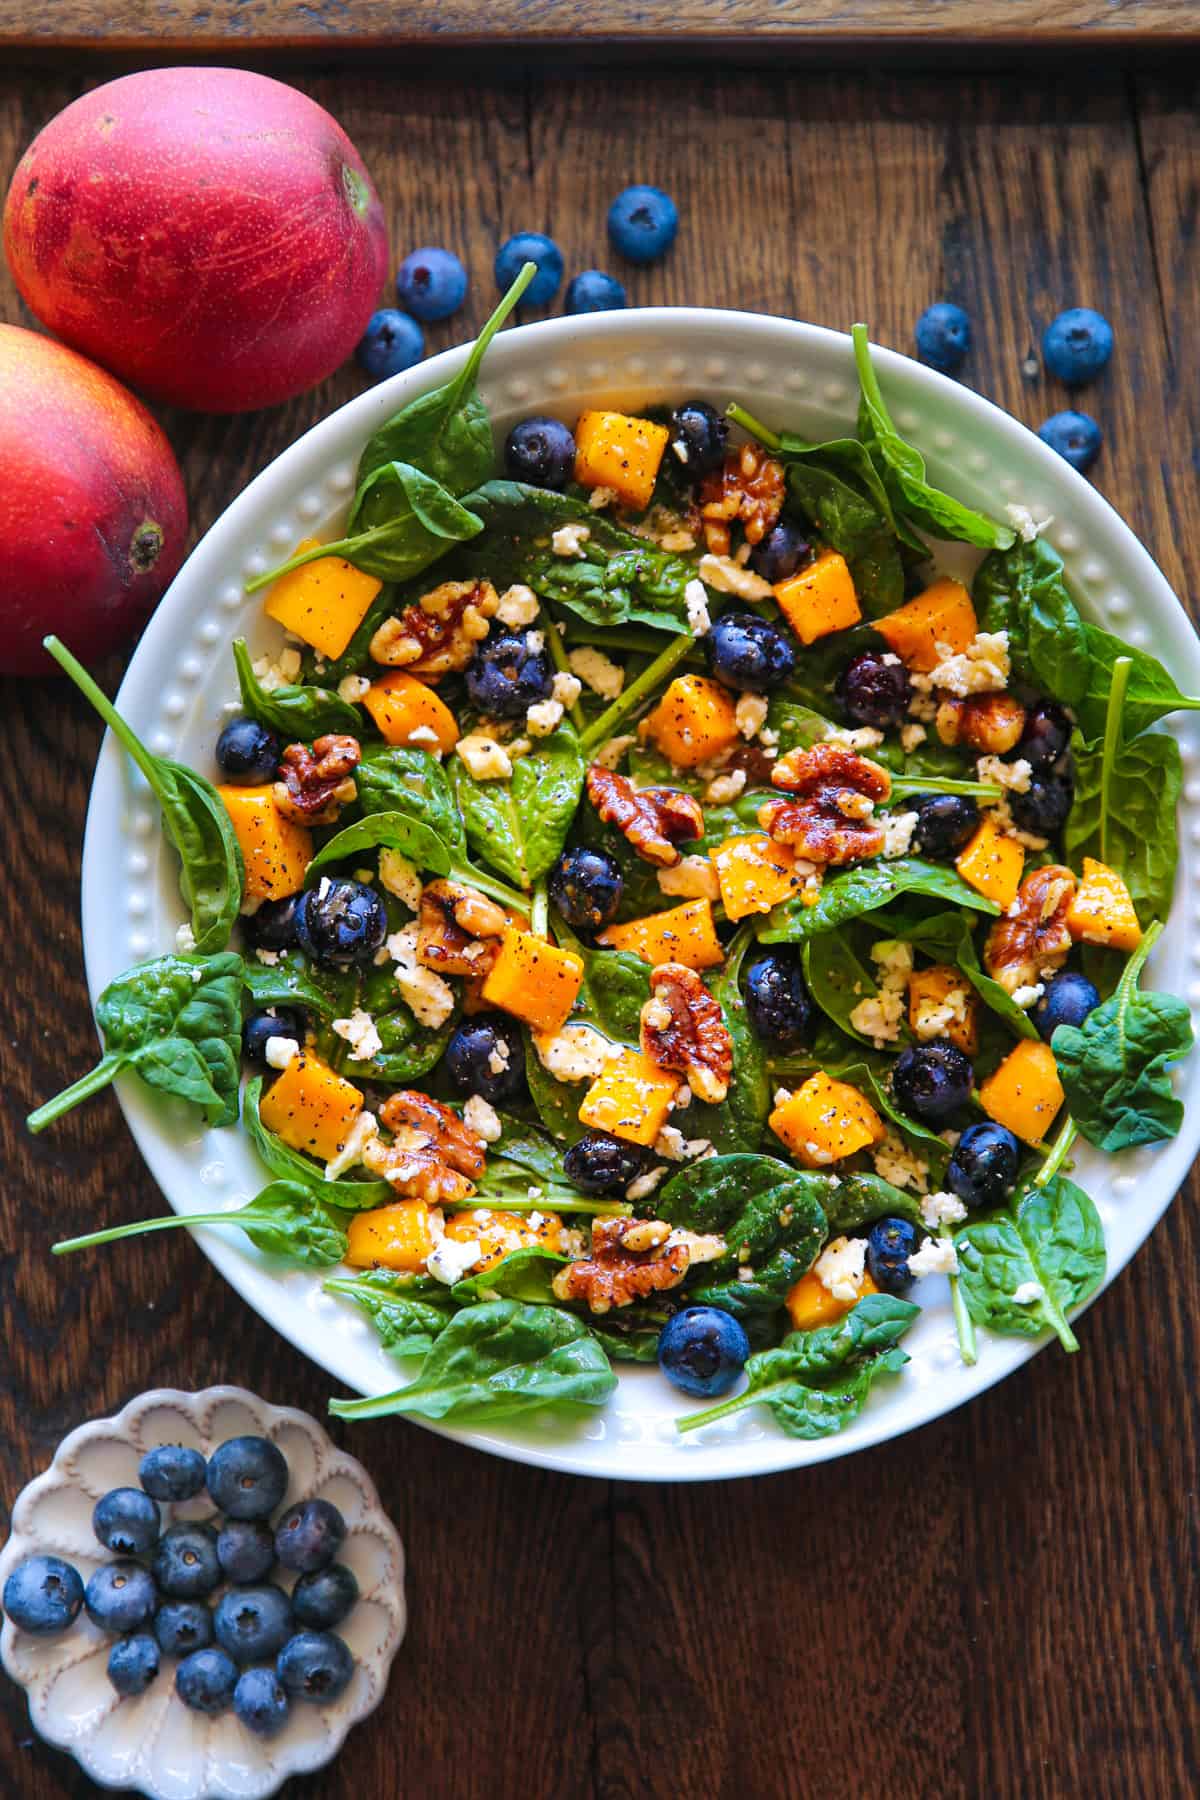 Mango Salad with Spinach, Blueberries, Walnuts, and Feta Cheese - in a white bowl.